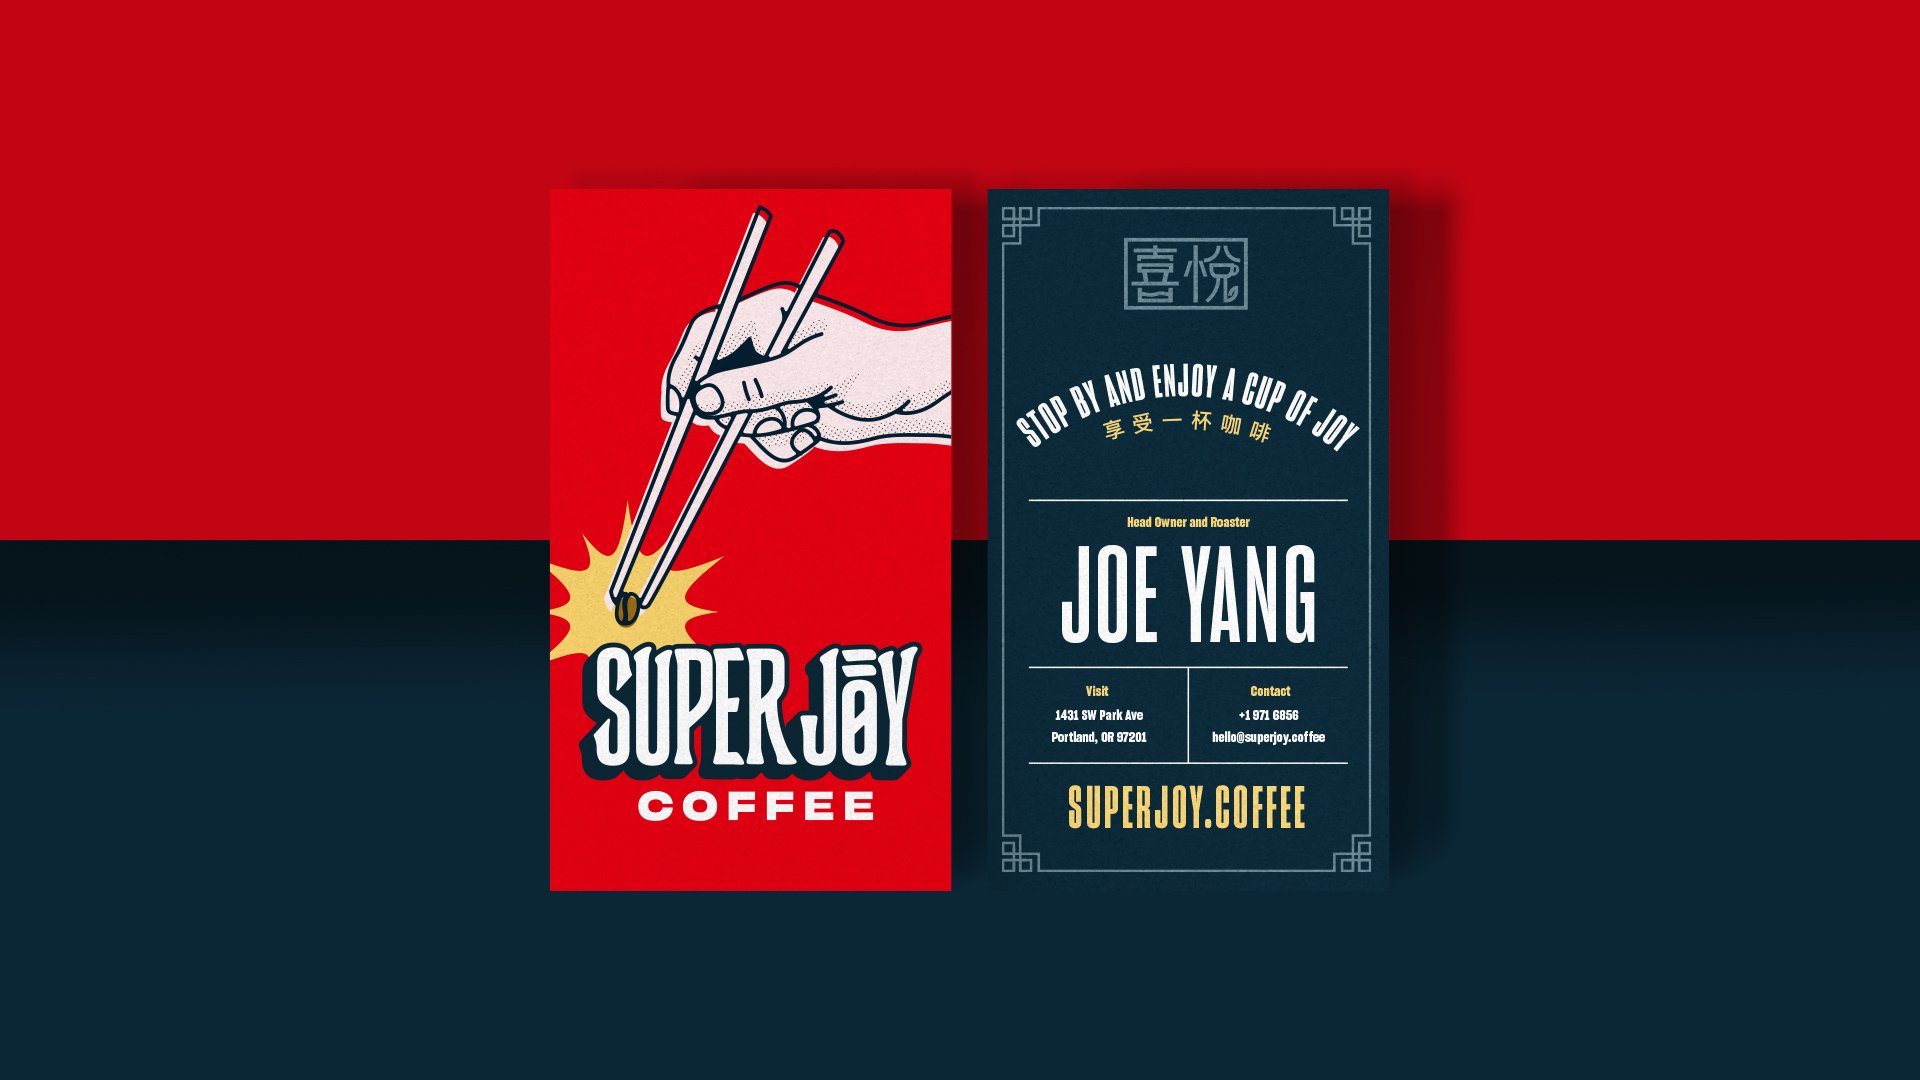 The business cards are red on one side and navy blue on the other. The red side features the logo with a hand holding chopsticks and a coffee bean. The navy side feature the contact information of the cardholder and the shop’s website.